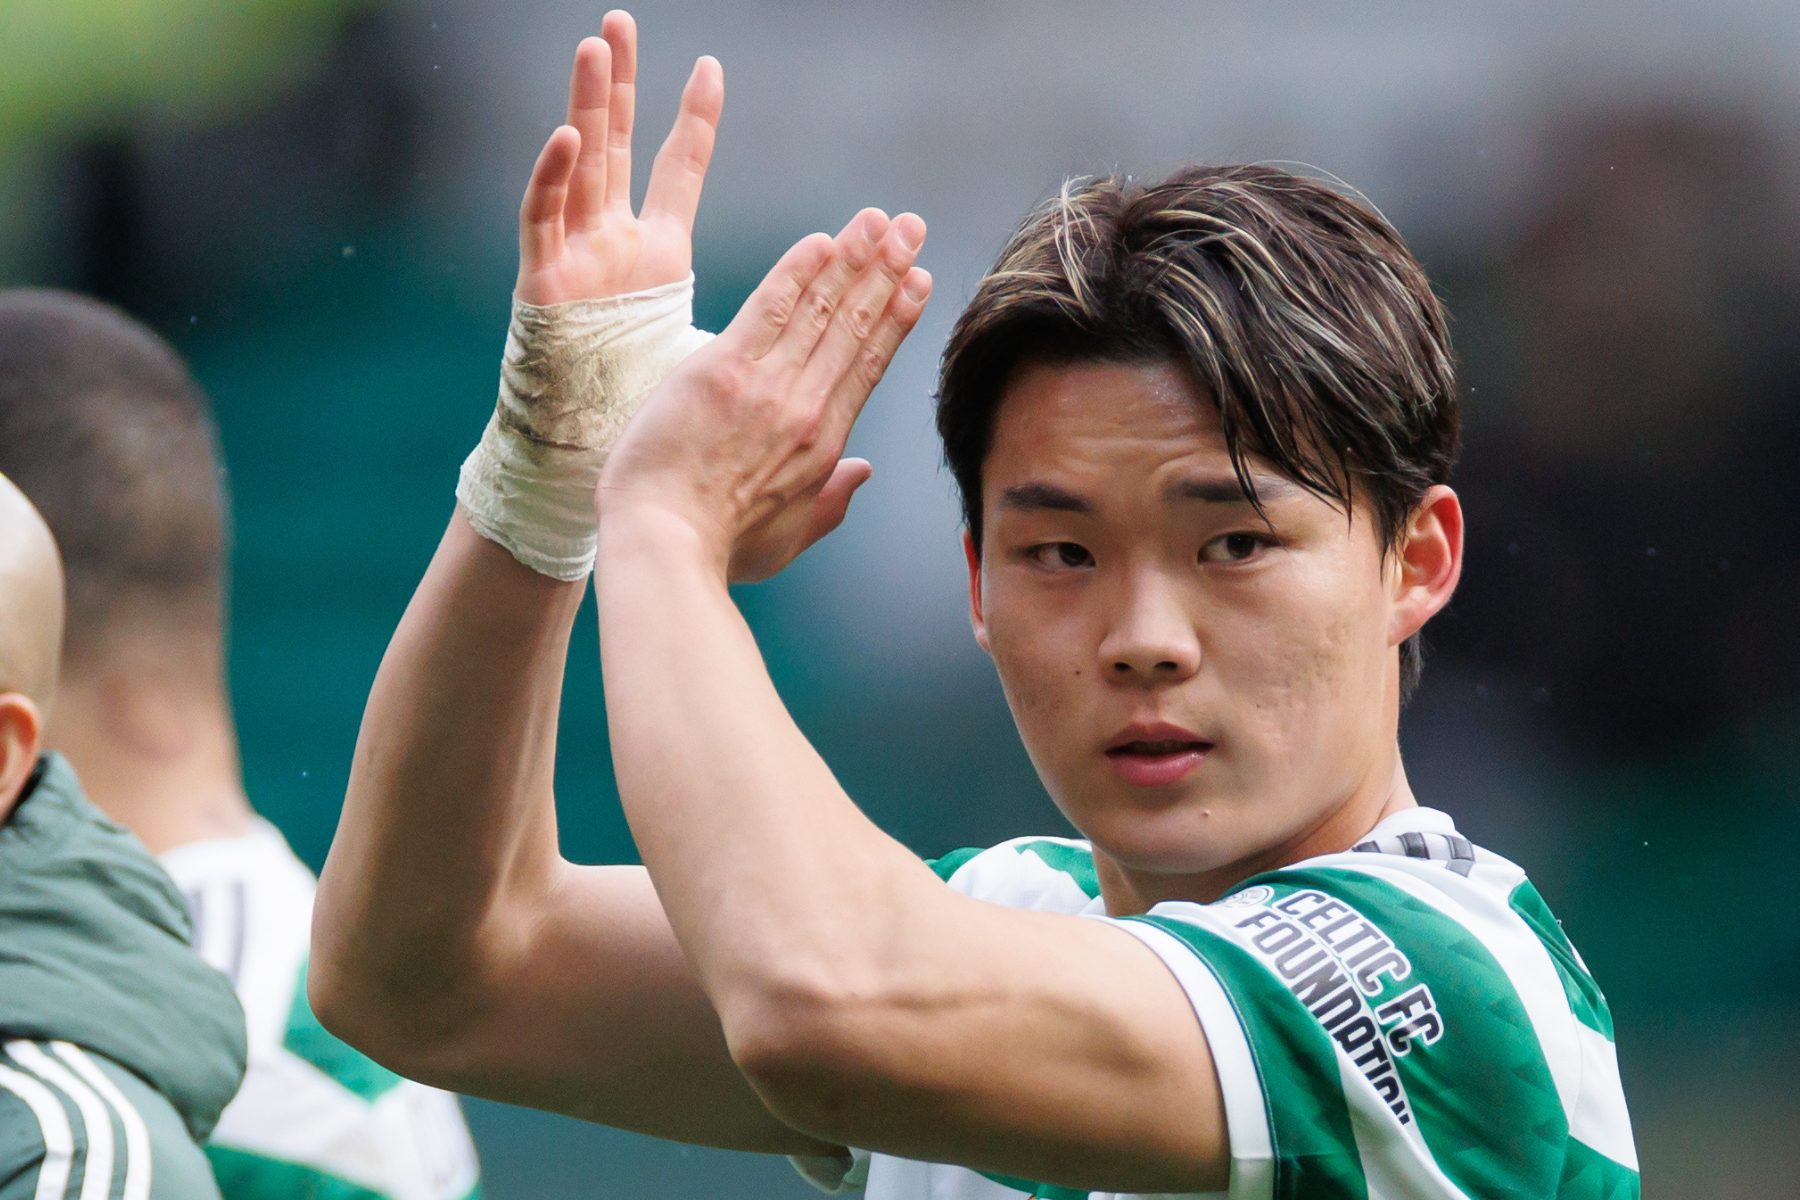 Klinsmann to watch Oh Hyeon-gyu in Celtic action against Kilmarnock